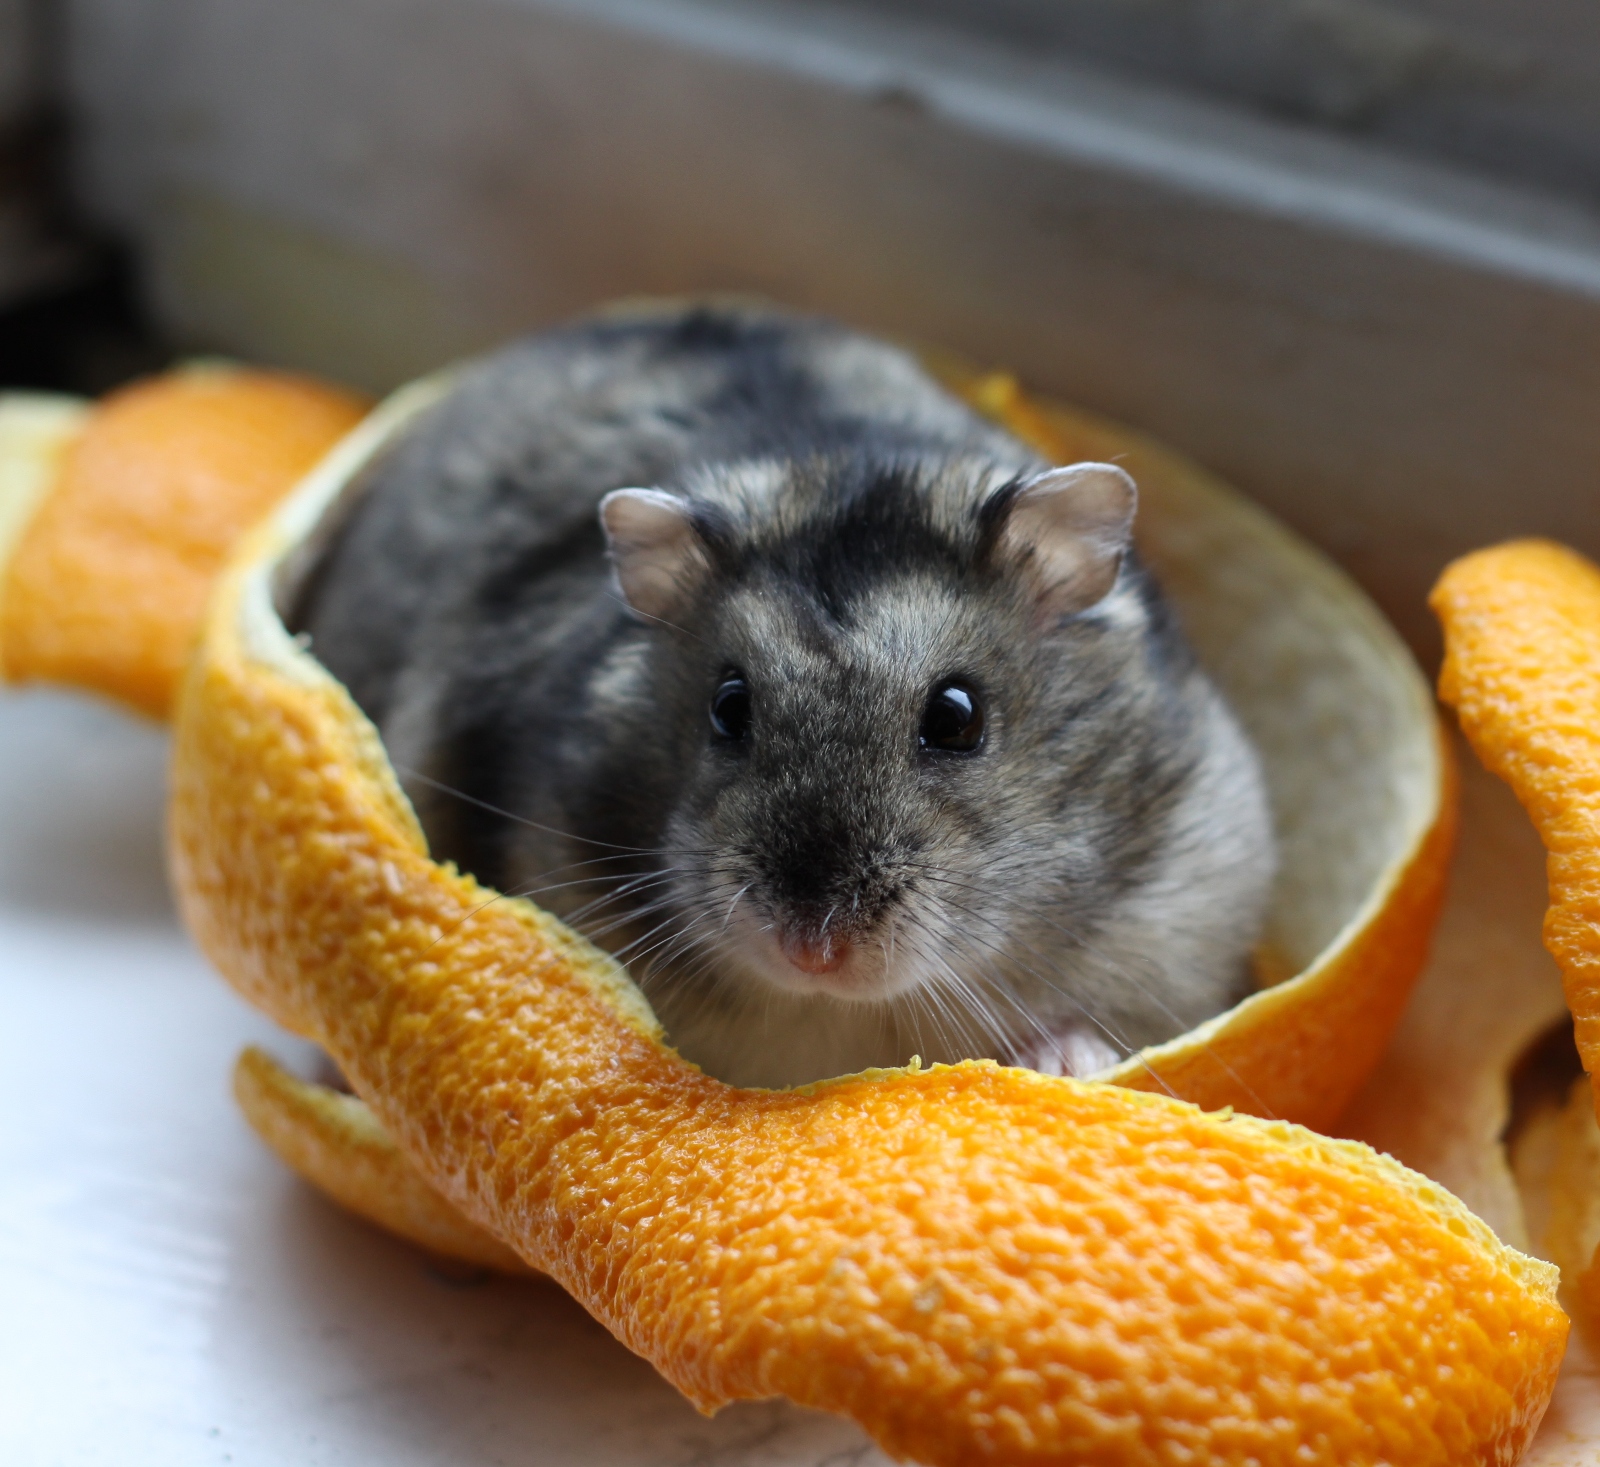 the small animal is sitting inside of an orange